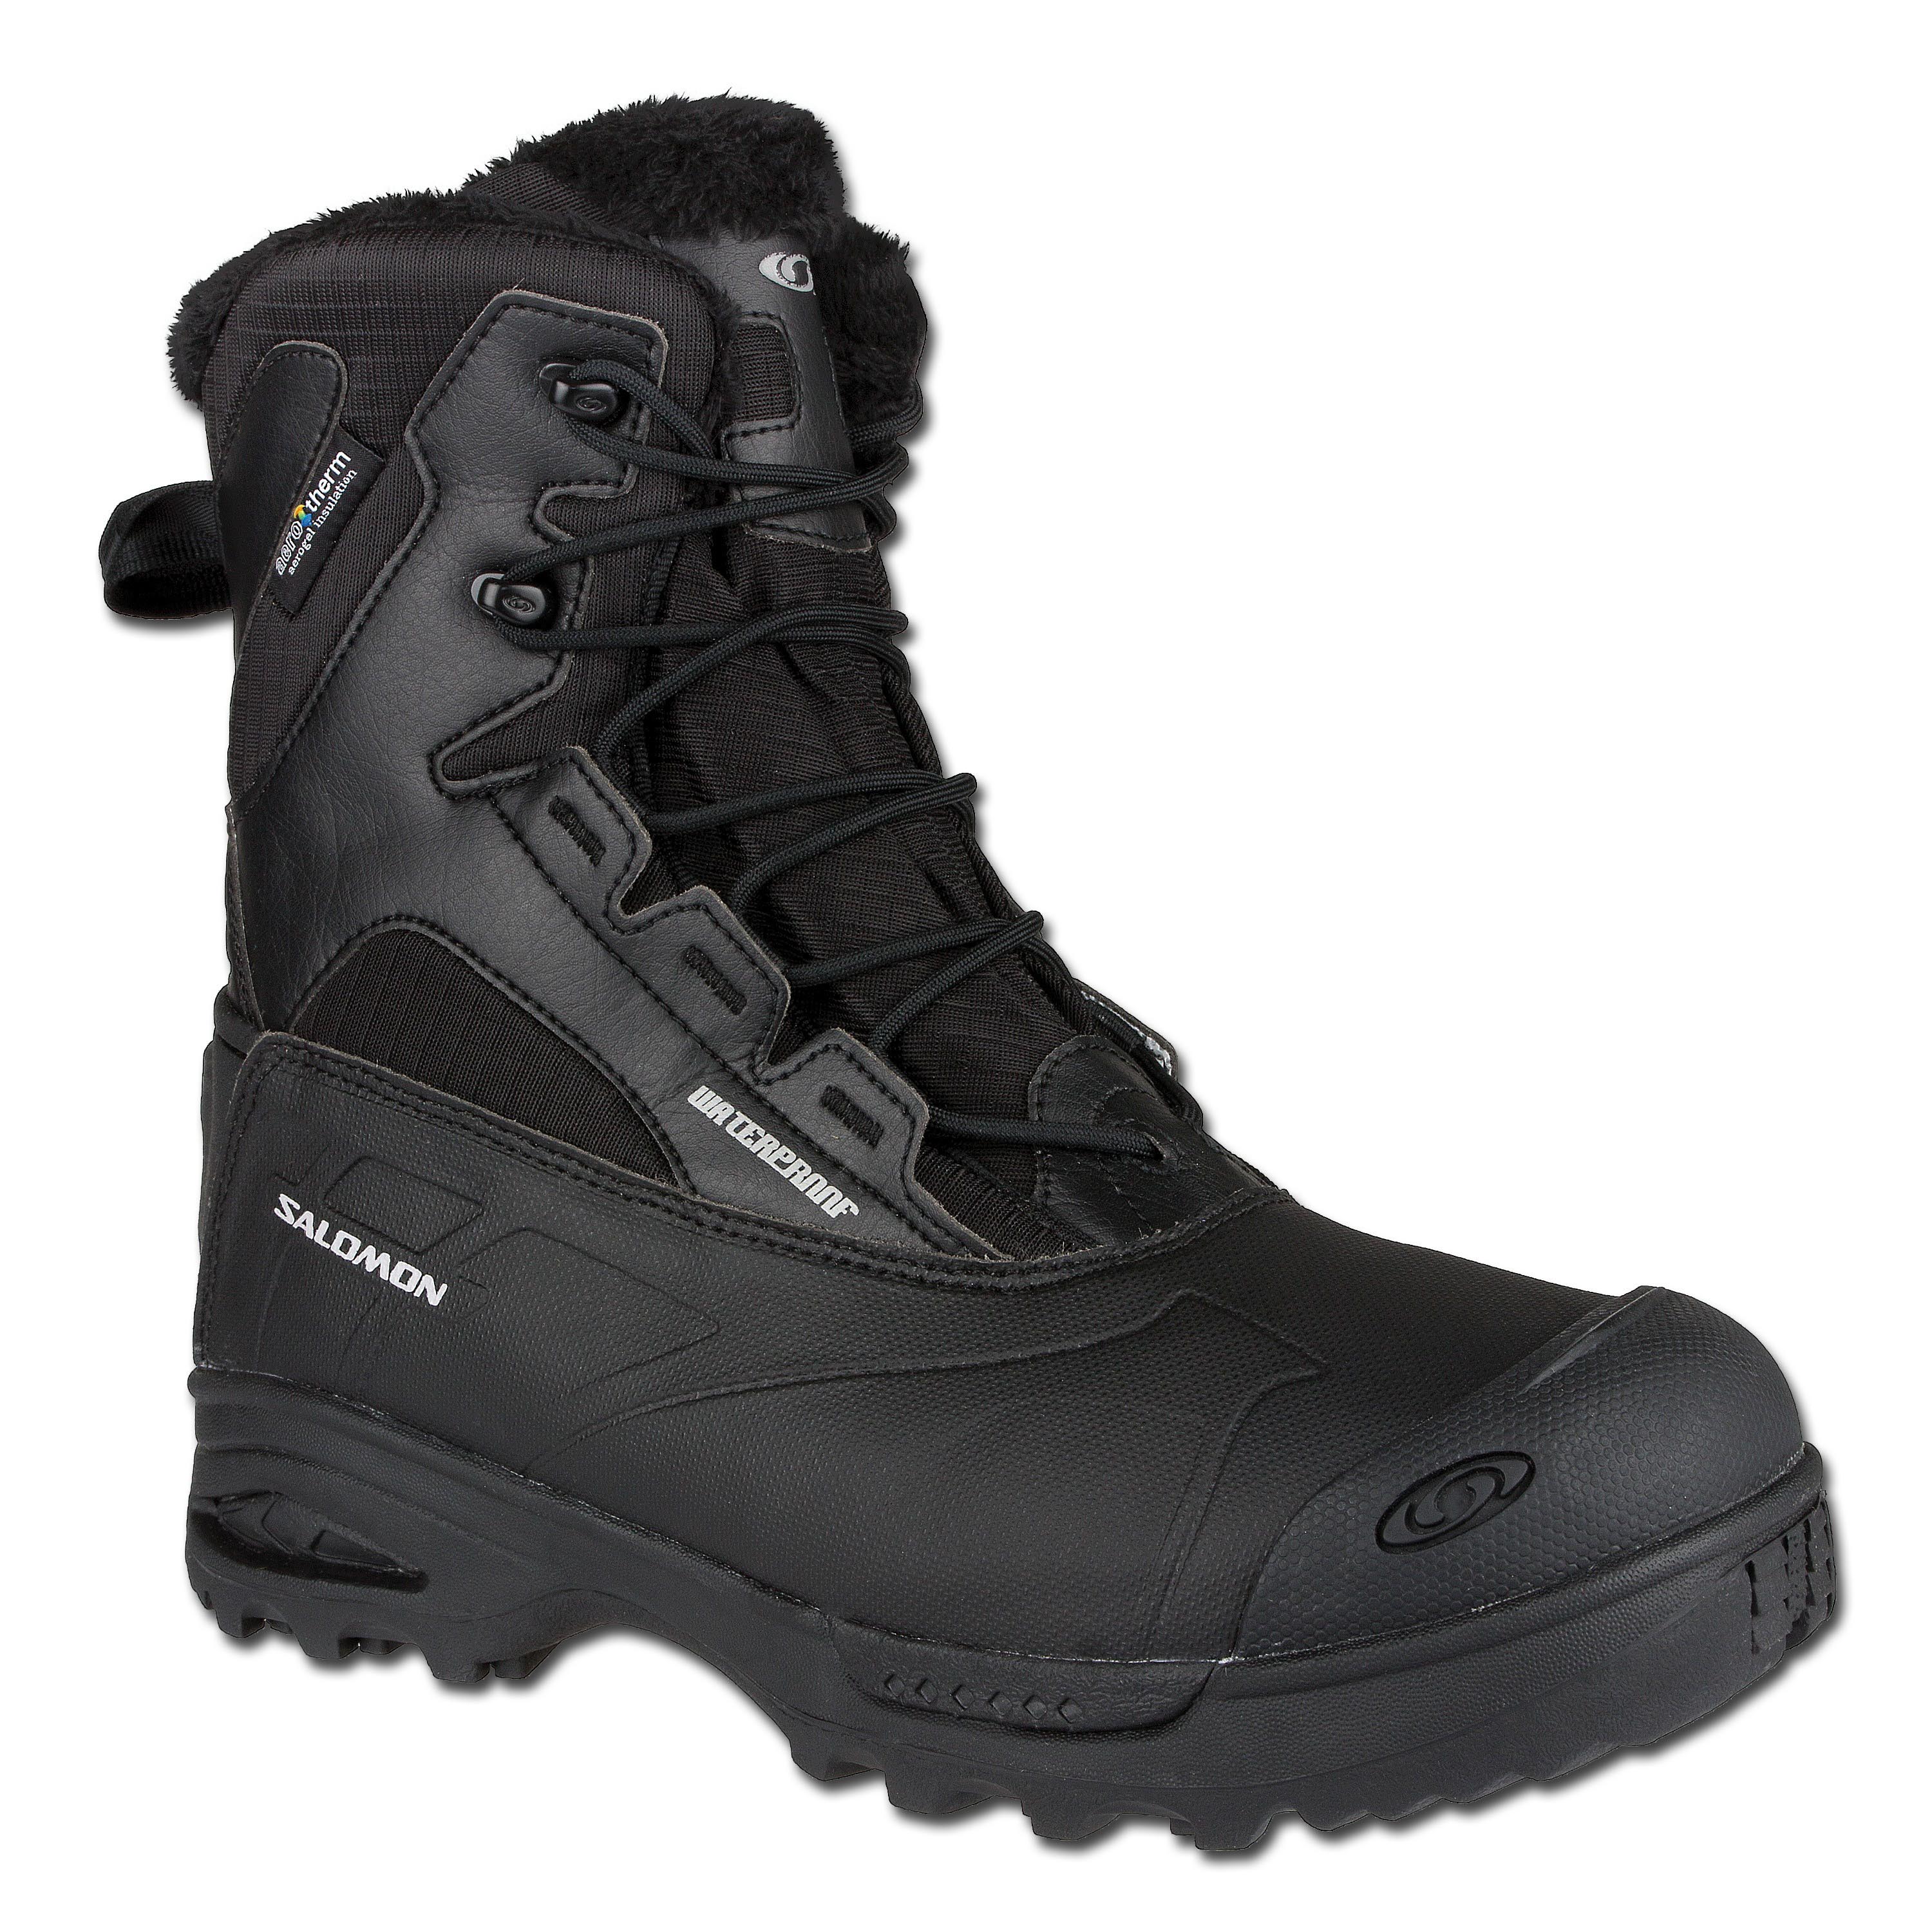 Winter Boots Toundra MID WP | Winter Boots Salomon Toundra MID WP | Other Boots | | Footwear Clothing